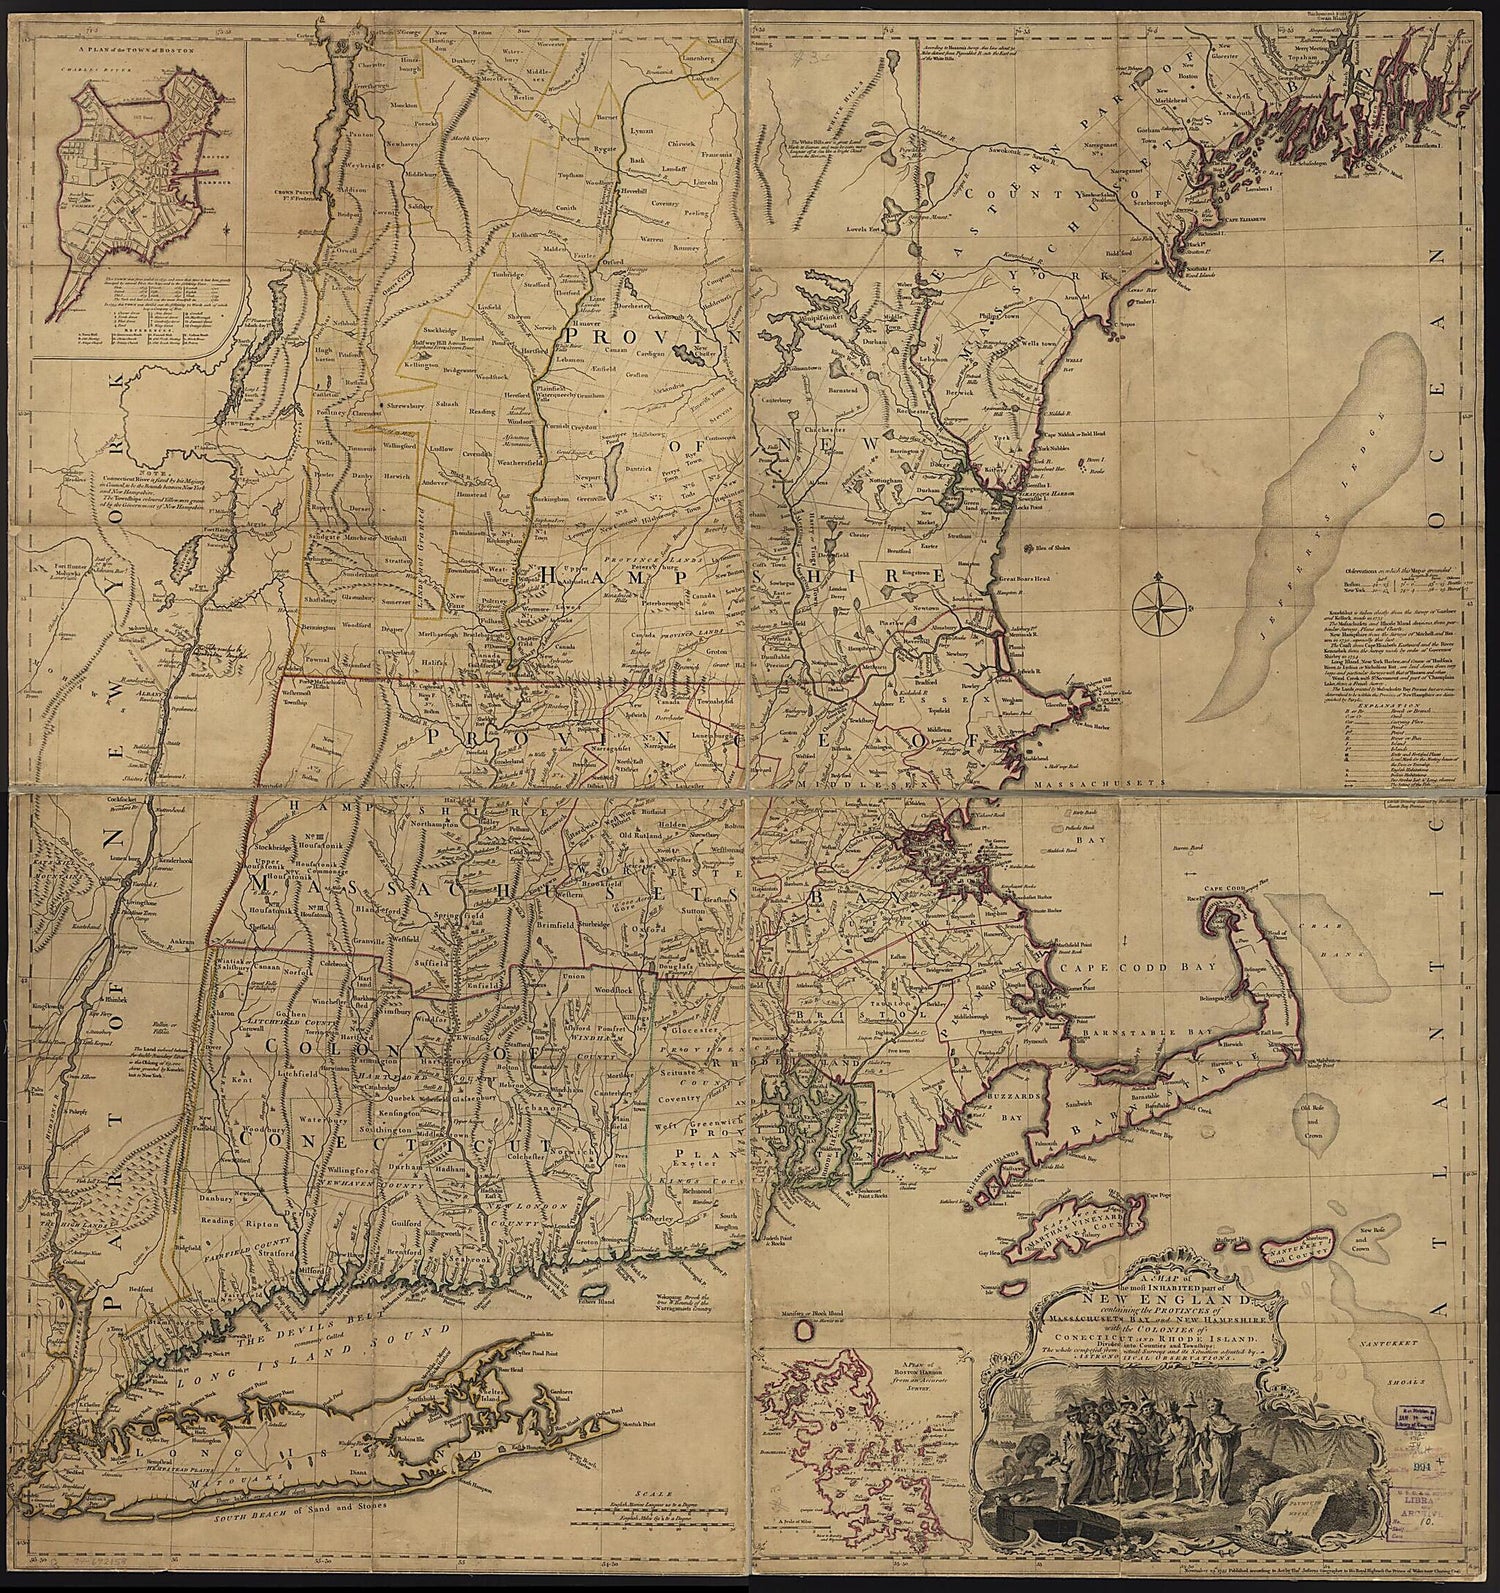 This old map of A Map of the Most Inhabited Part of New England, Containing the Provinces of Massachusets Bay and New Hampshire, With the Colonies of Conecticut and Rhode Island, Divided Into Counties and Townships: the Whole Composed from Actual Surveys